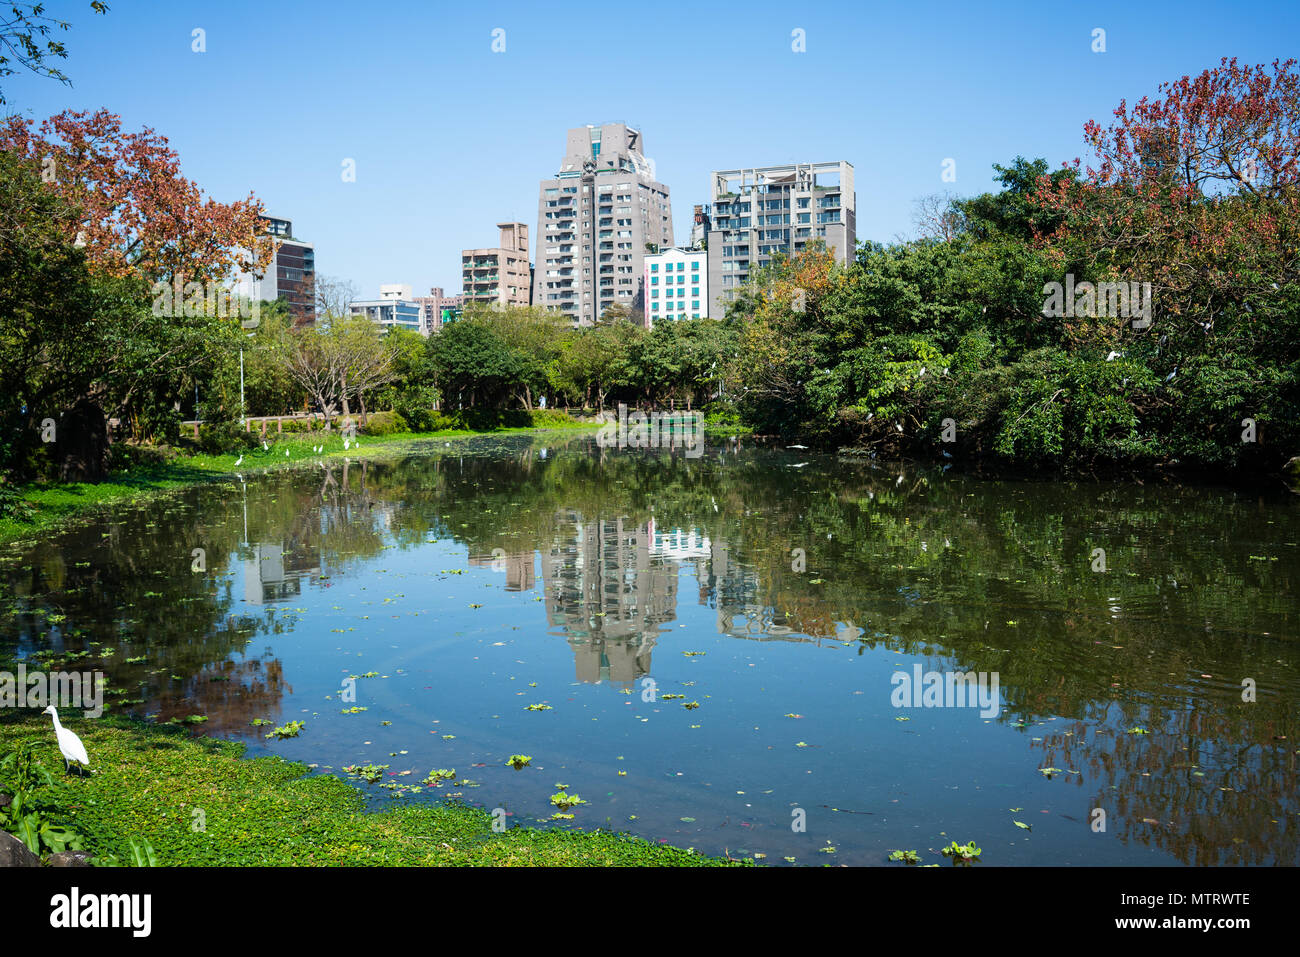 Scenic ecological pool in Daan forest park and buildings in background in Da'an district Taipei Taiwan Stock Photo